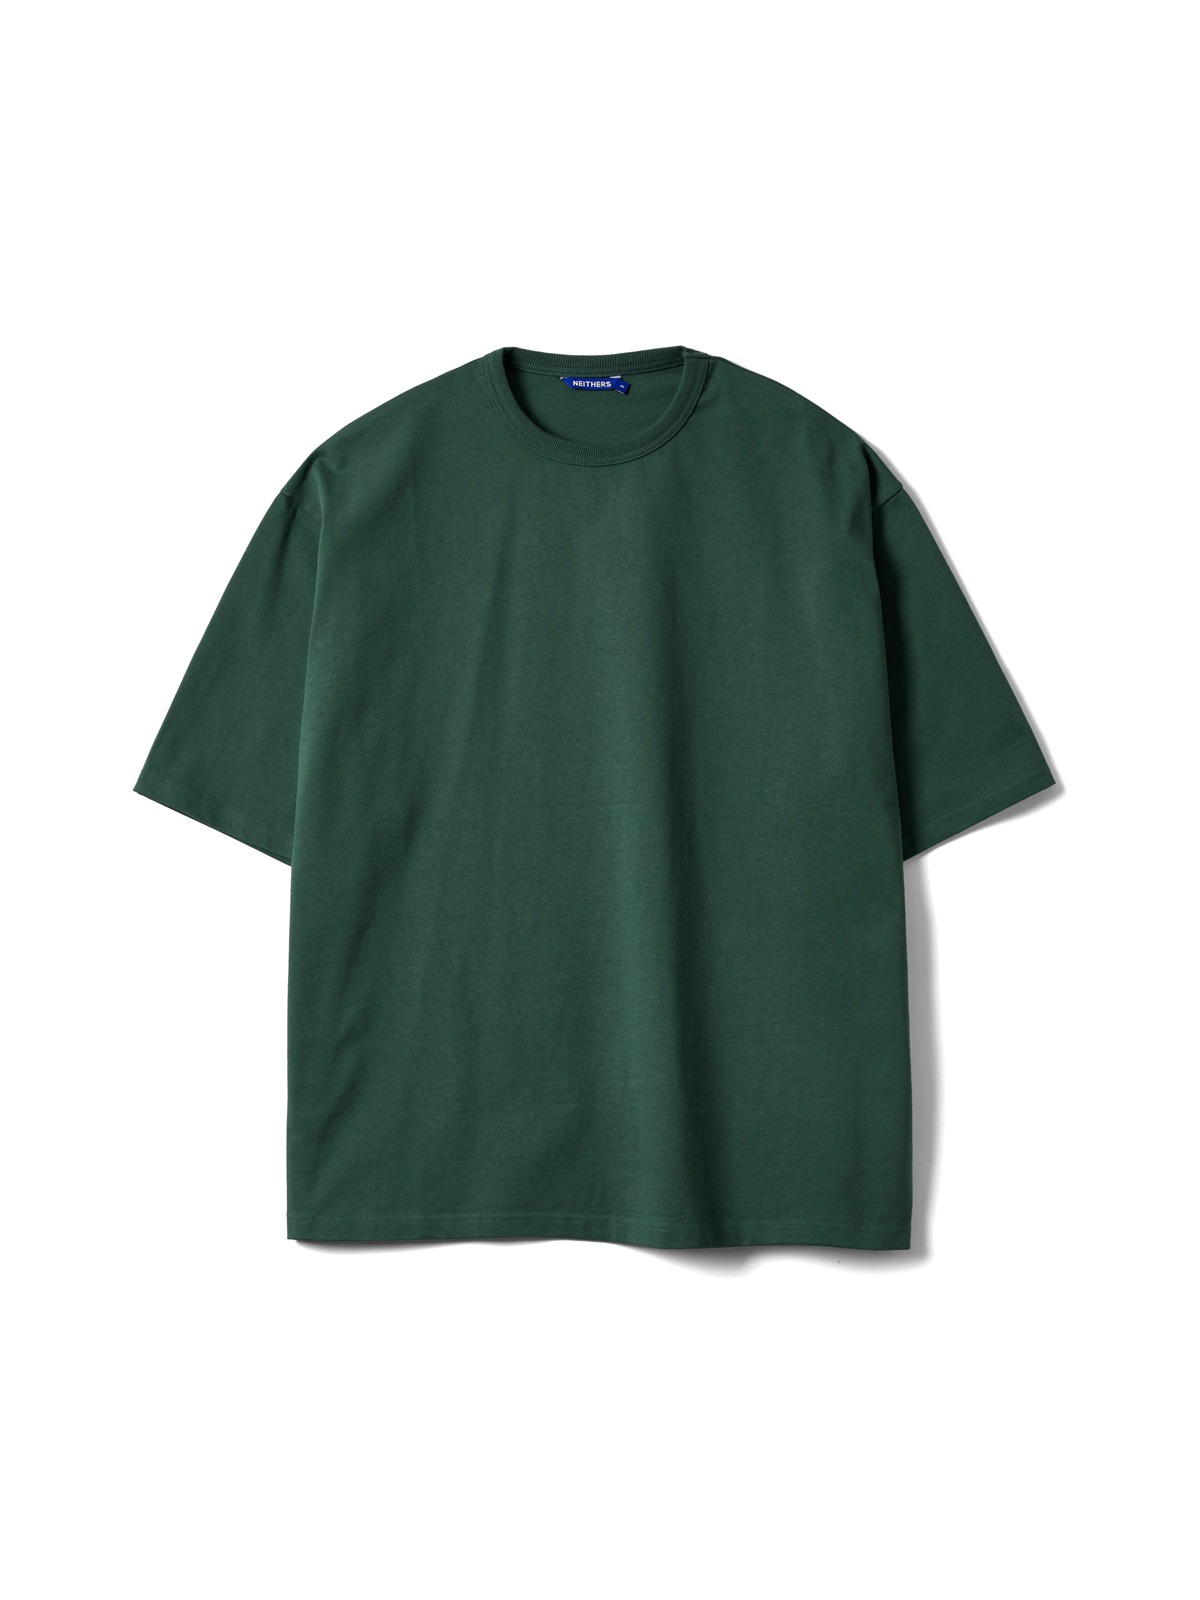 Wide S/S T-Shirt (Forest Green)